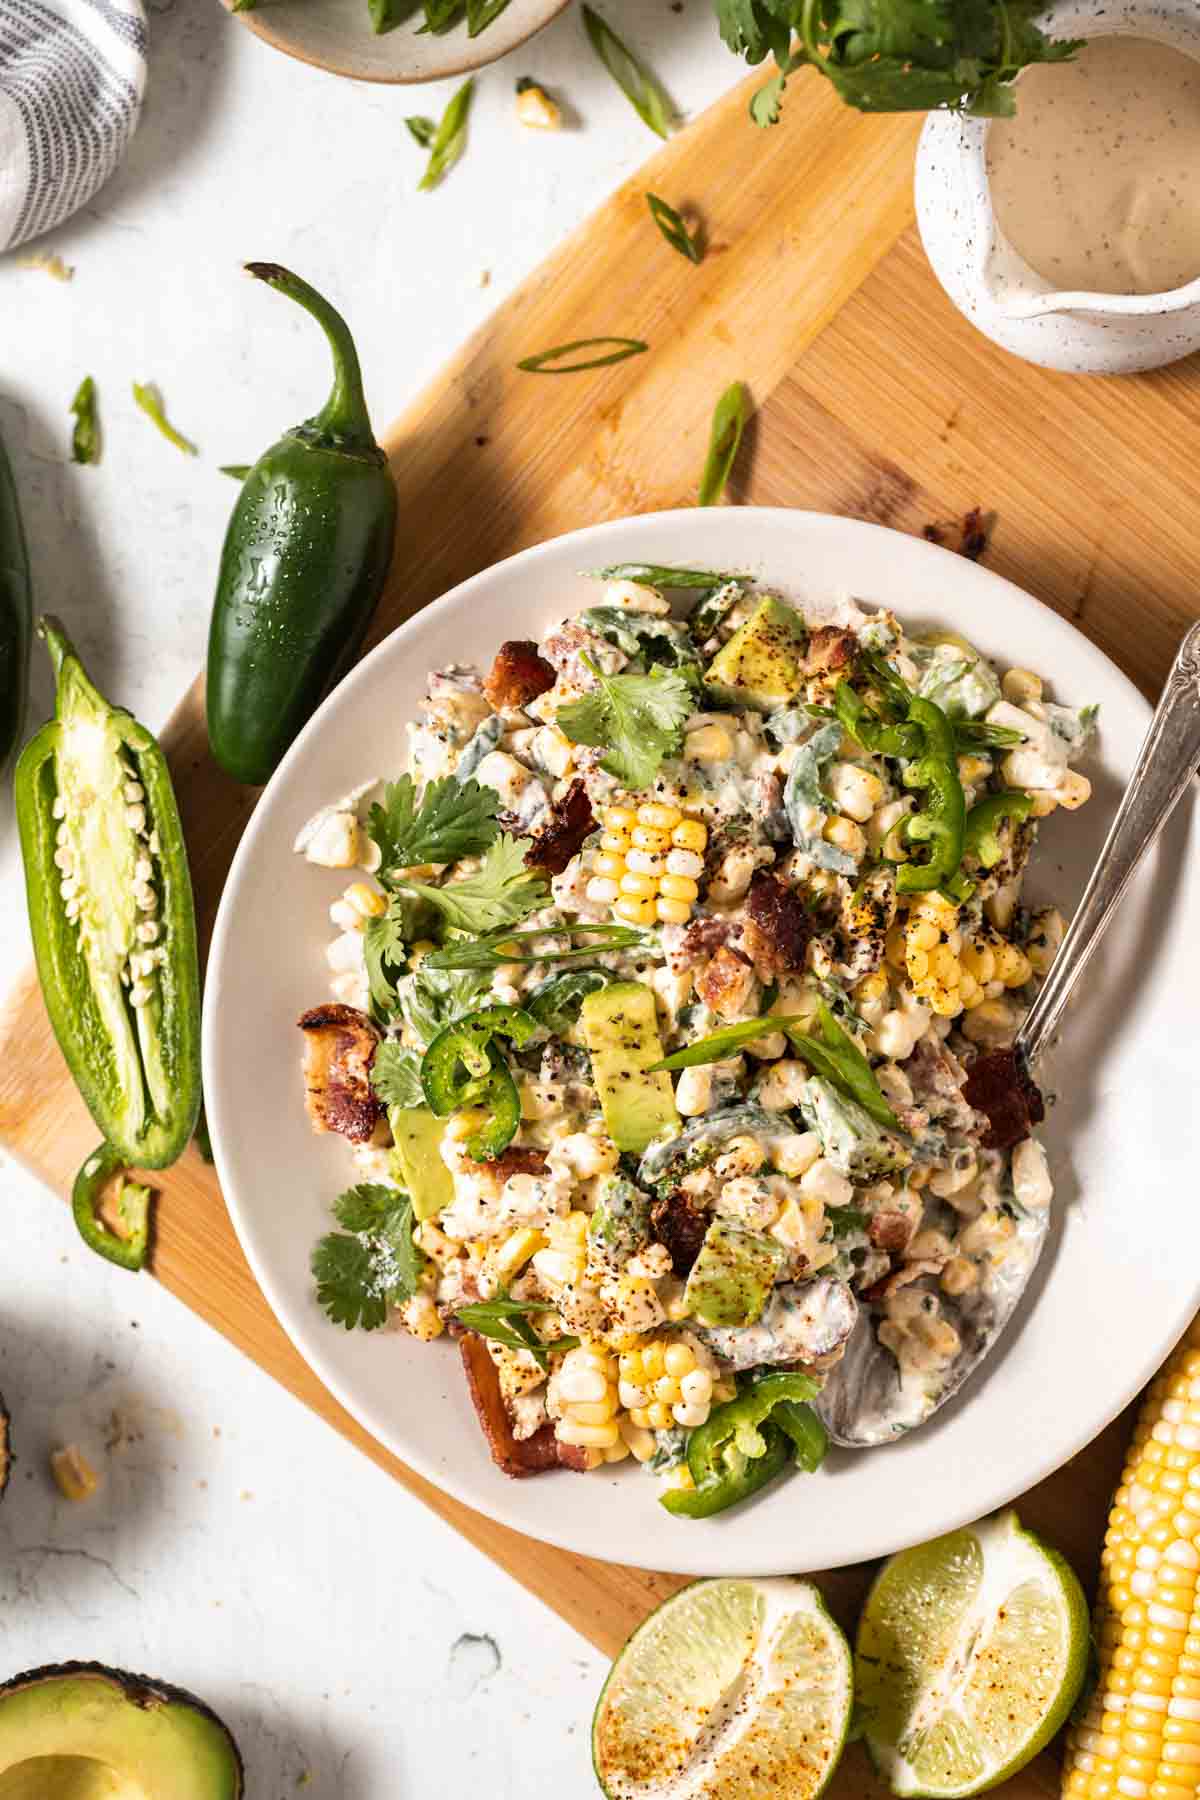 Corn salad with bacon, lime, avocado, cilantro and jalapeno in a bowl with a serving spoon.